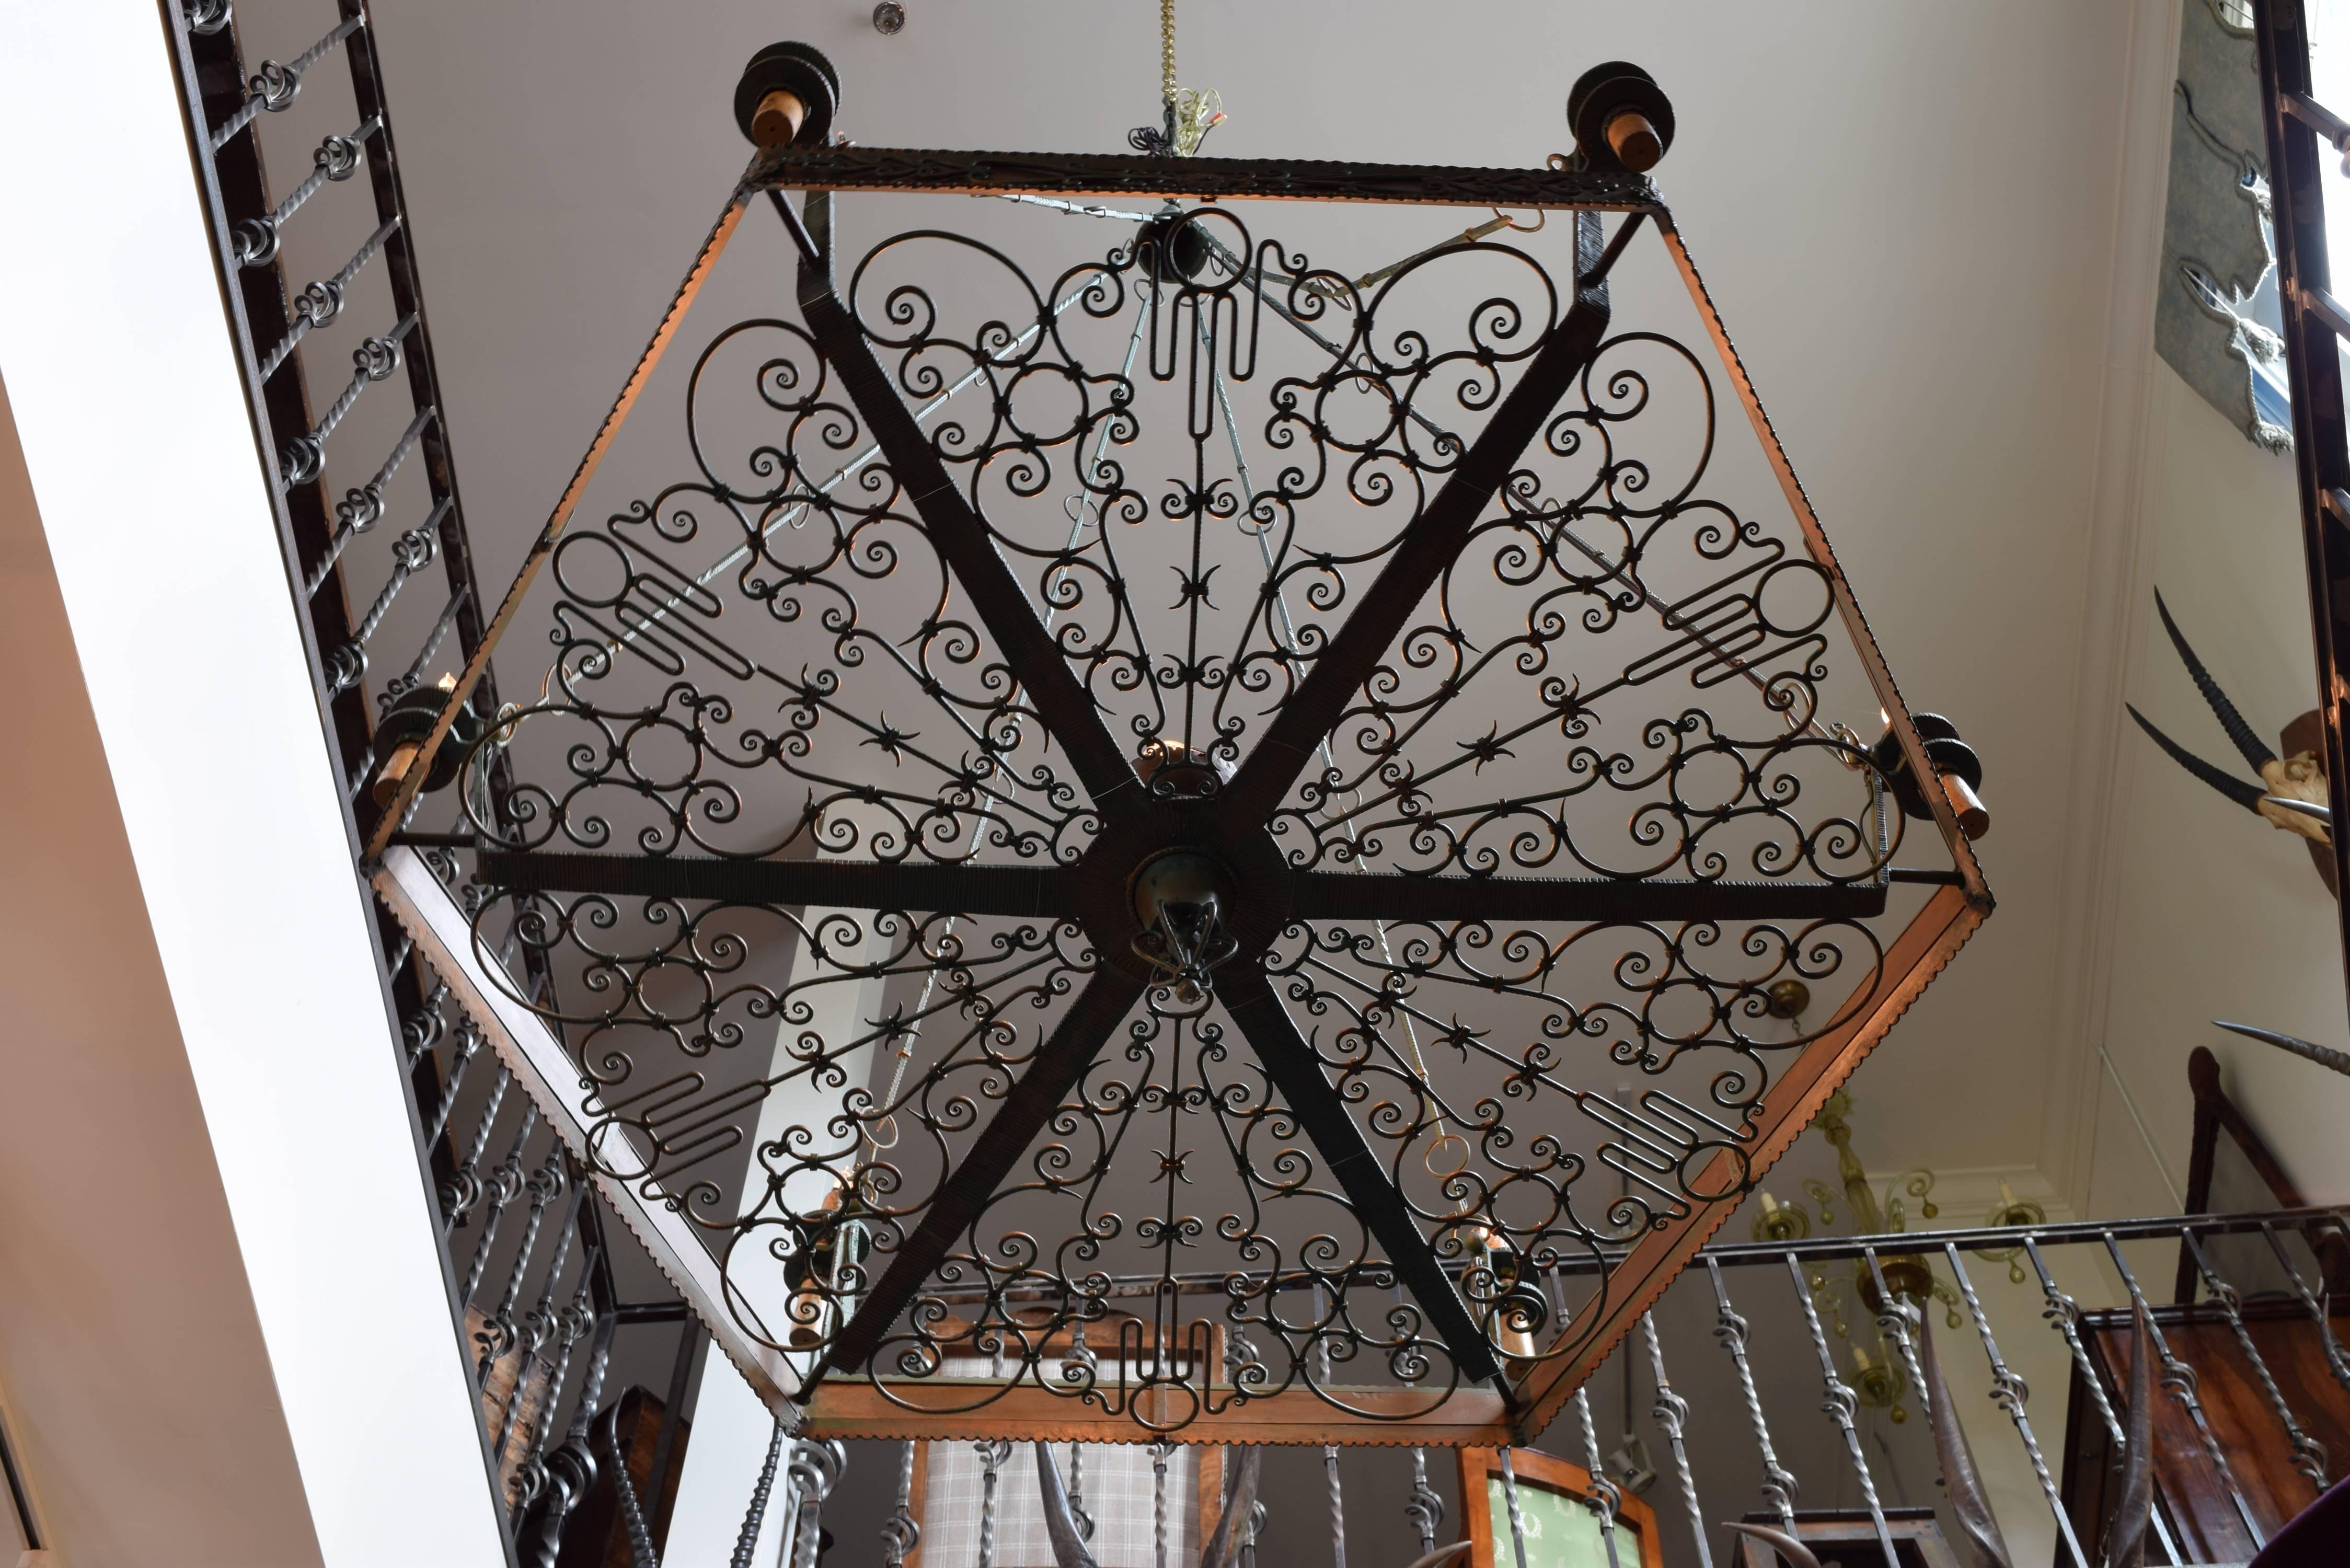 Seven-light chandelier of hexagonal form and having detailed decorative ironwork, formerly hanging in the Castello Angioino di Parabita, Lecce, Italy.  Maker is Antonio D' Andrea (Lecce 1908-1955).